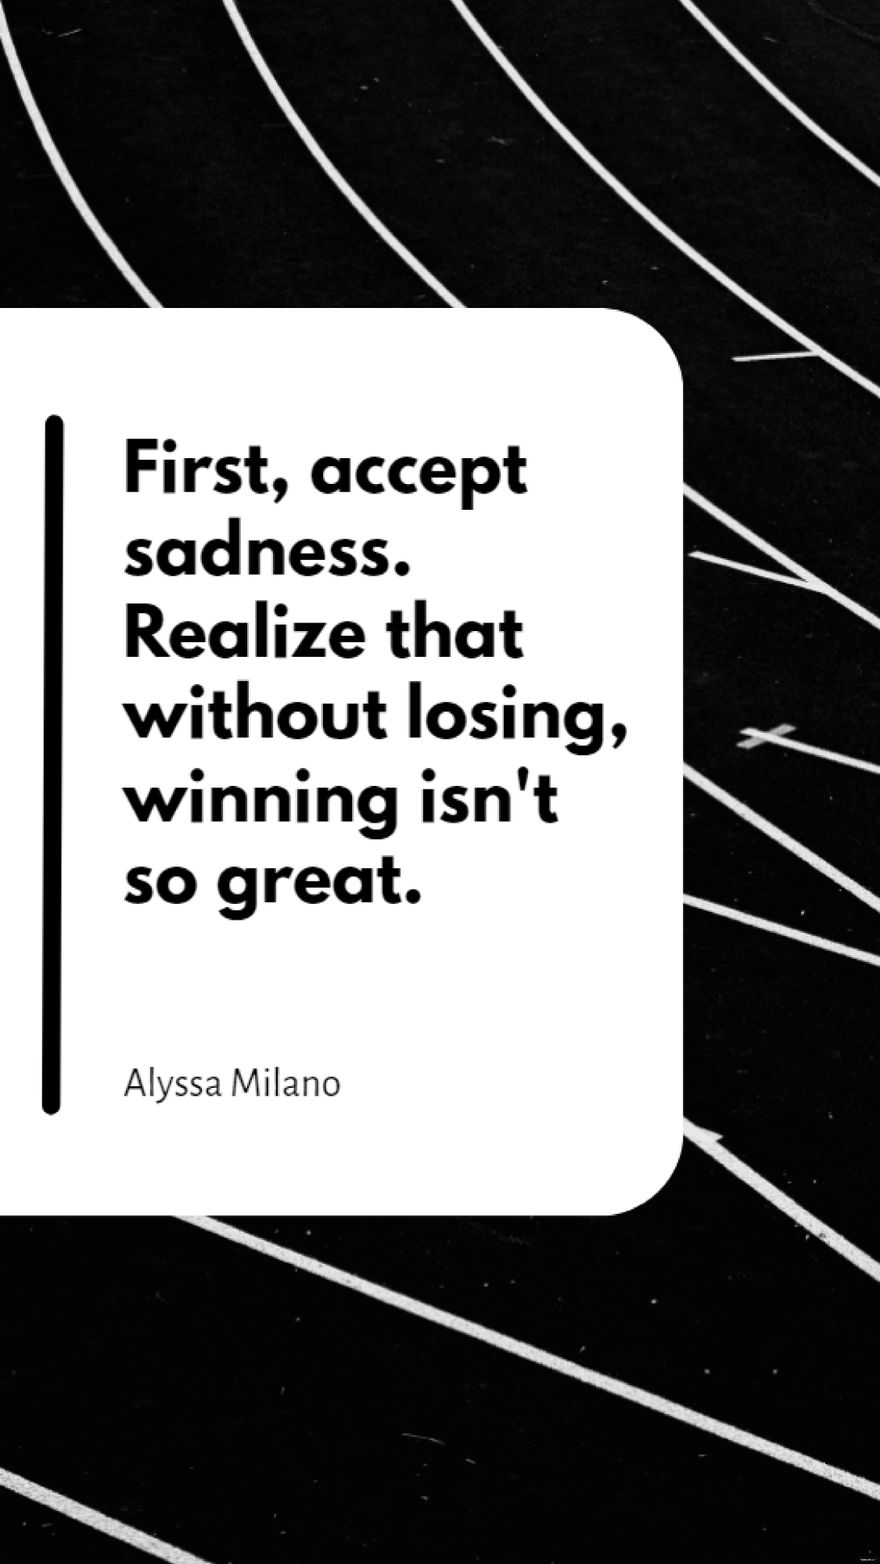 Alyssa Milano - First, accept sadness. Realize that without losing, winning isn't so great.